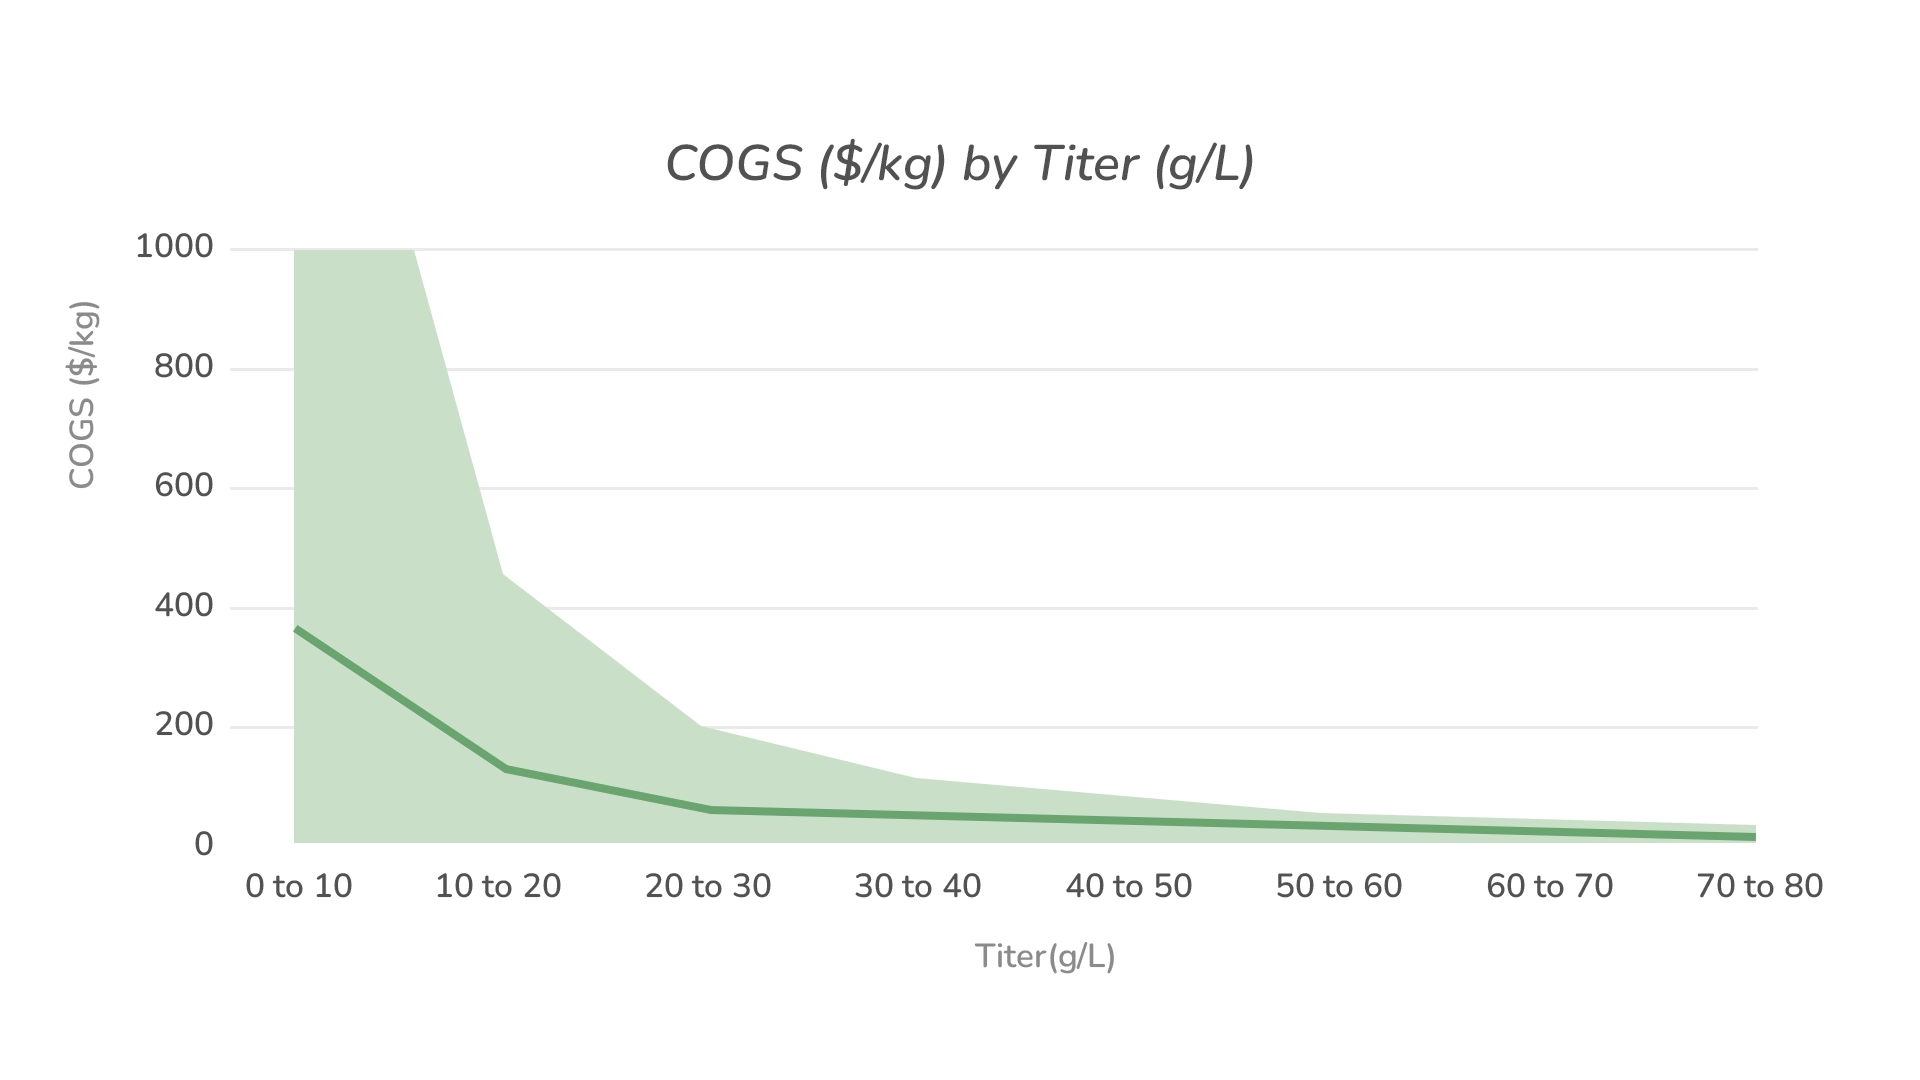 COGS ($/KG) by Titer (g/L)